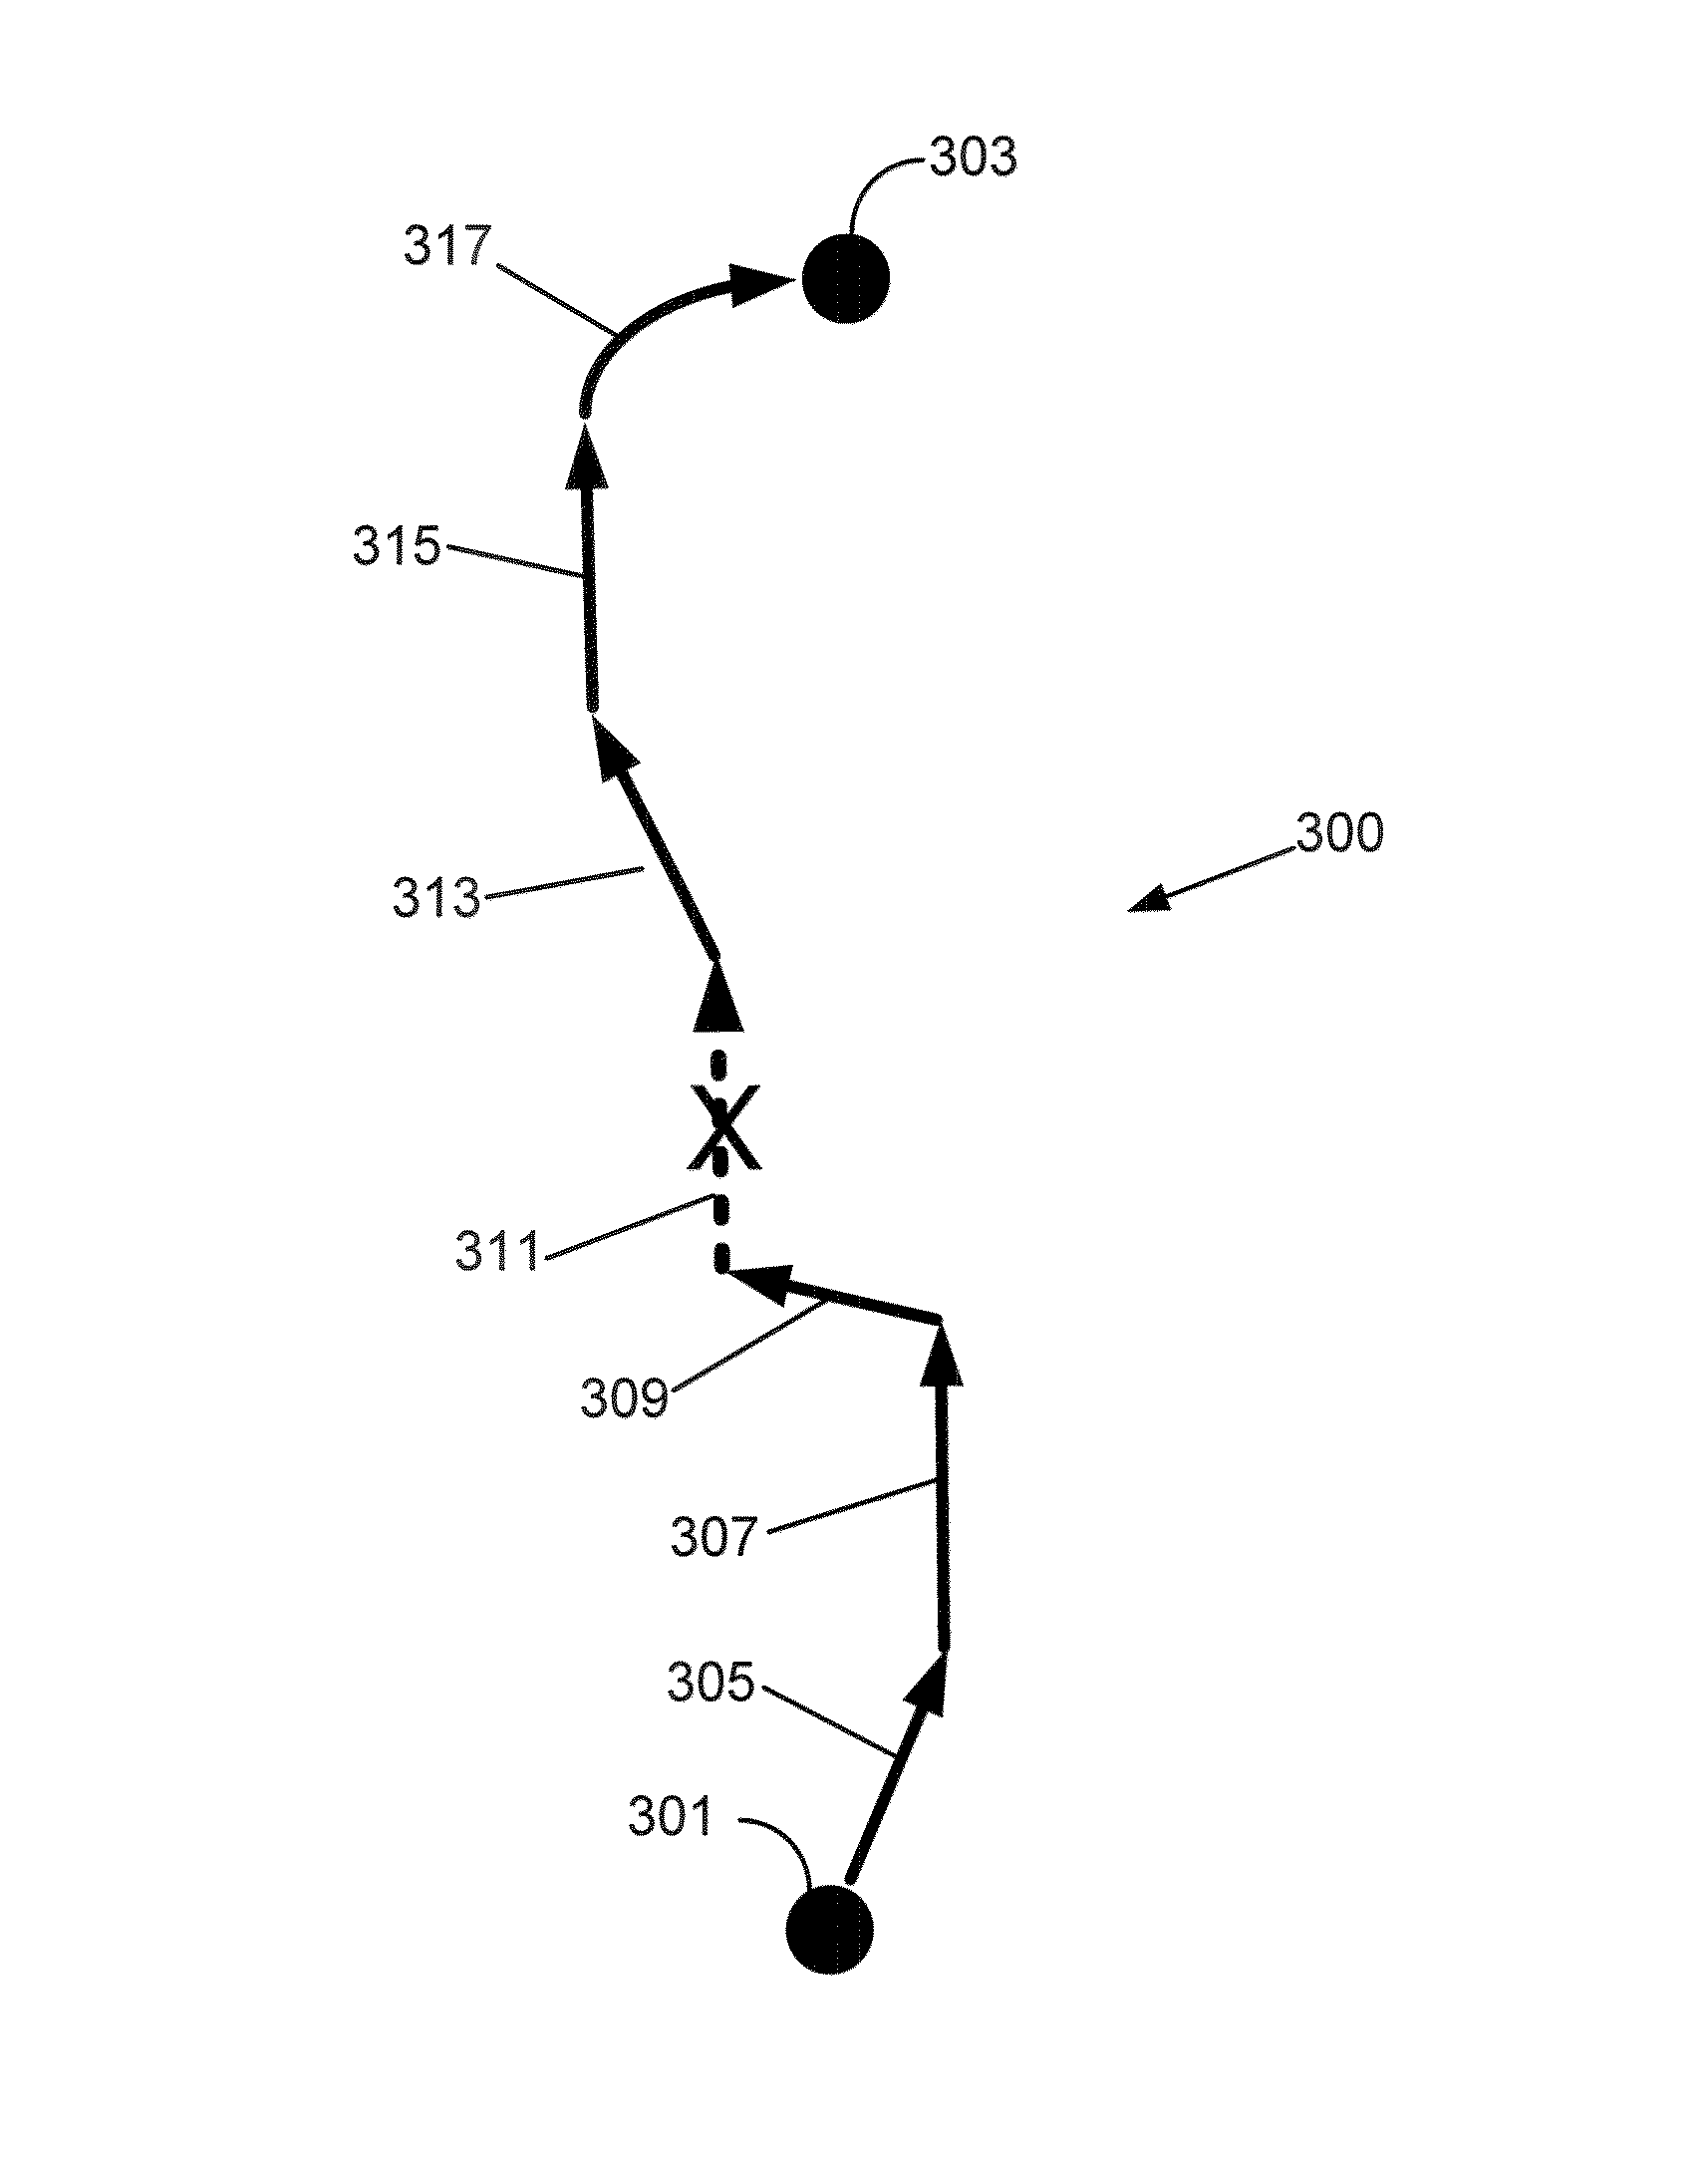 Methods to improve route quality using off-route data